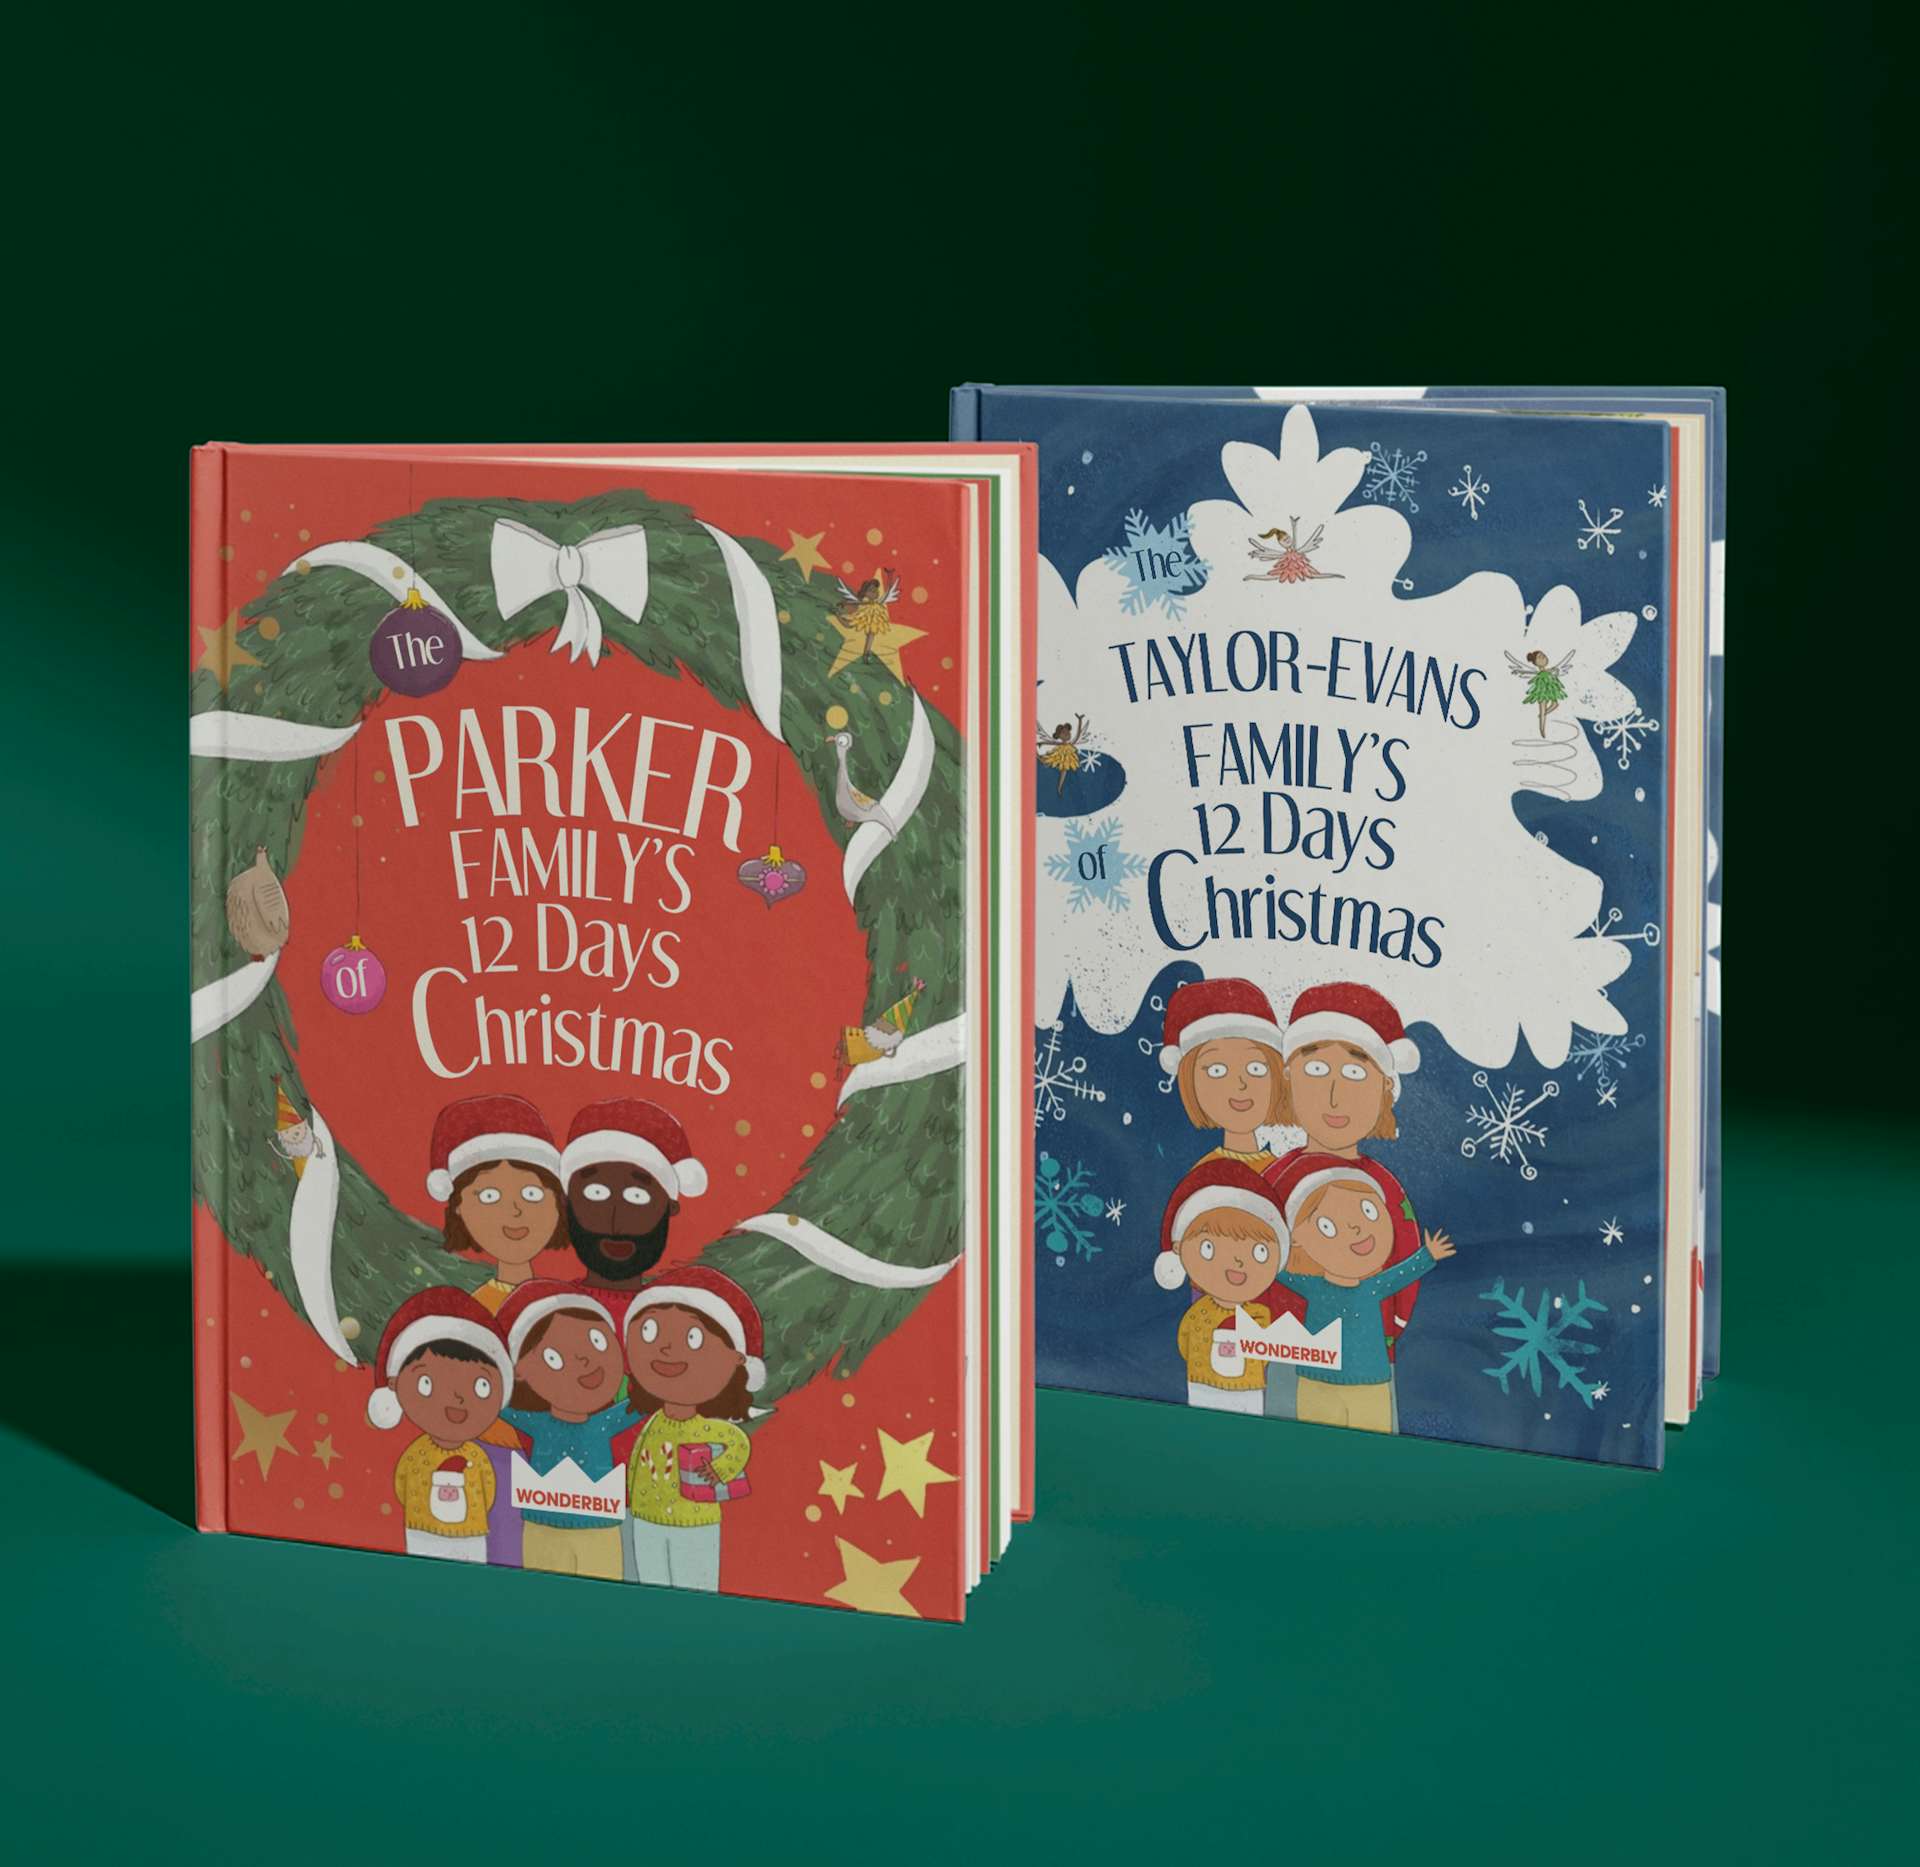 Two covers of 12 Days of Christmas